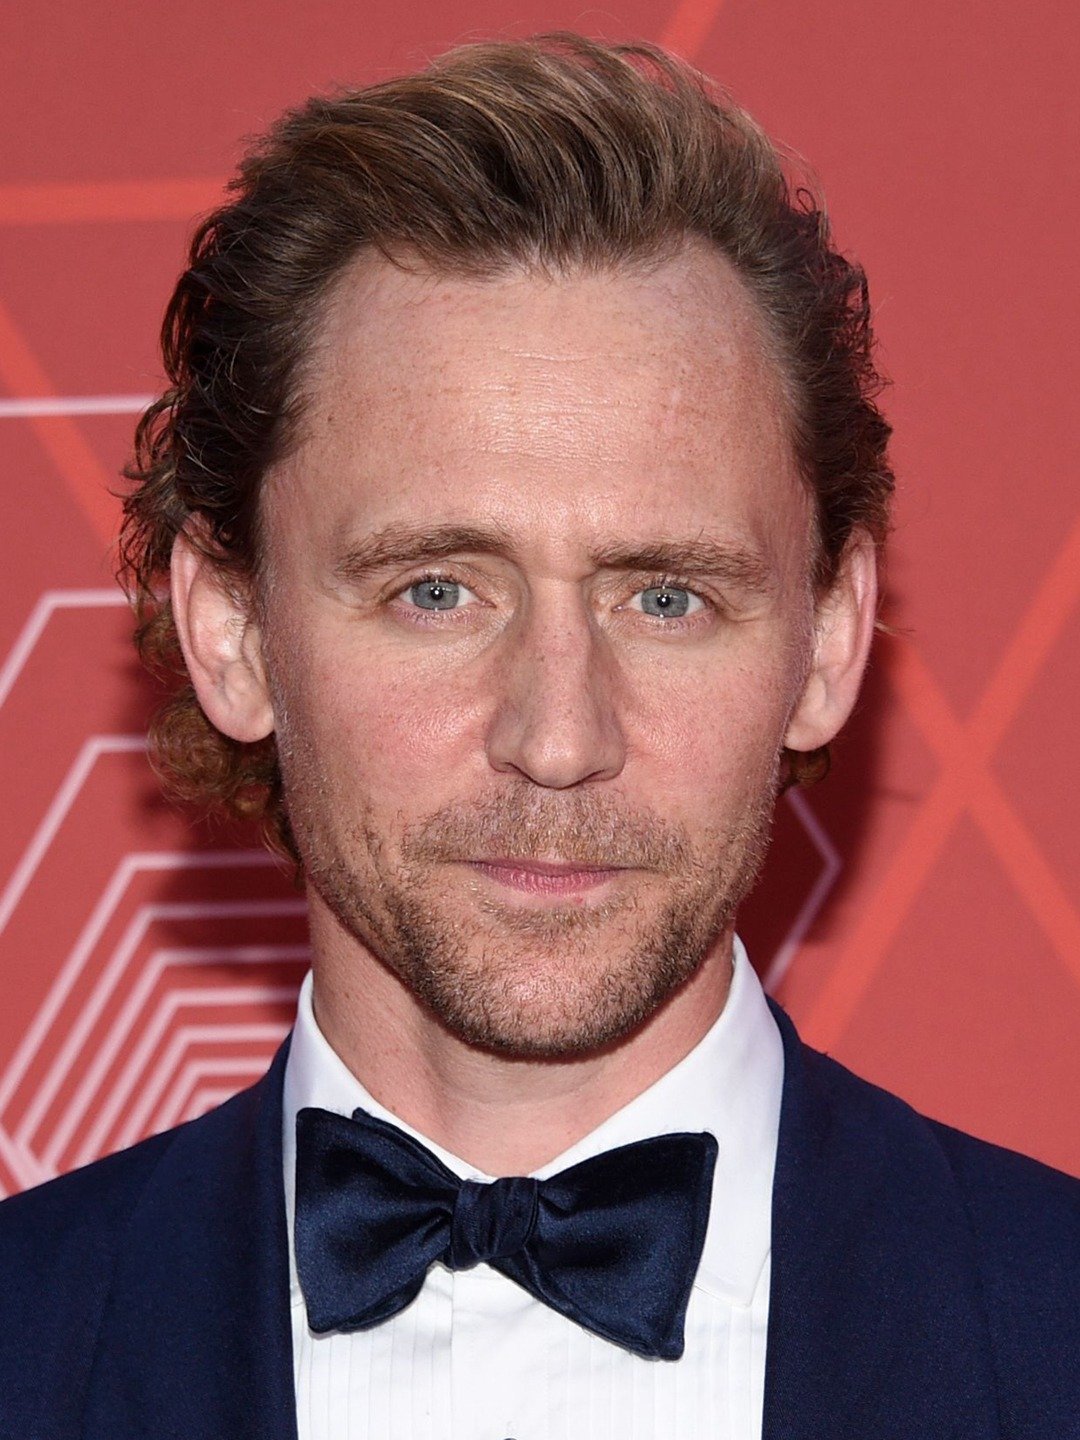 30 Interesting Things Most People Don’t Know About Tom Hiddleston